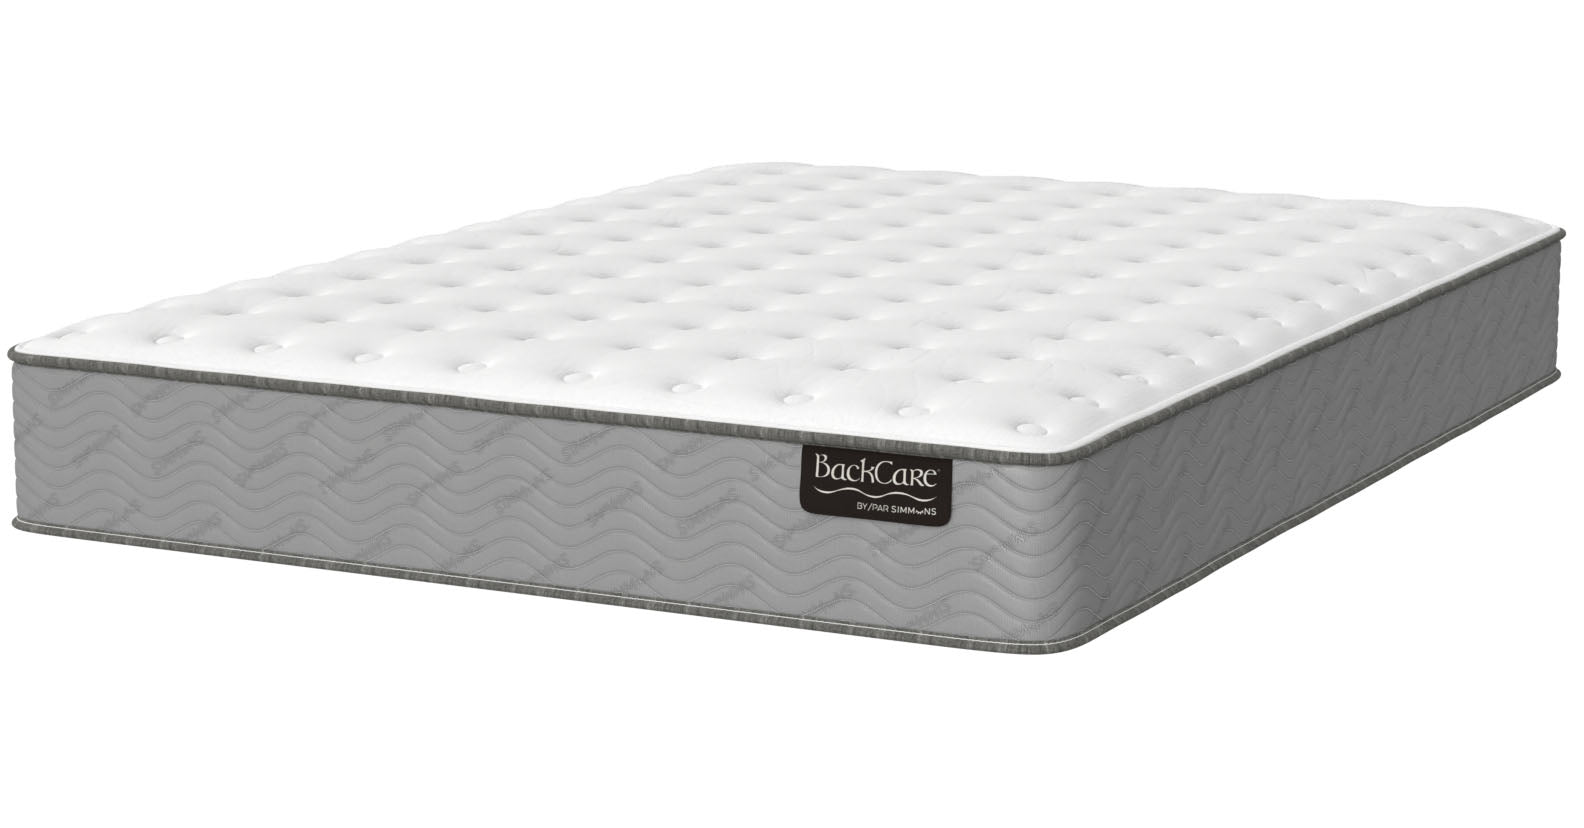 Simmons BackCare Duo Firm Mattress - MJM Furniture